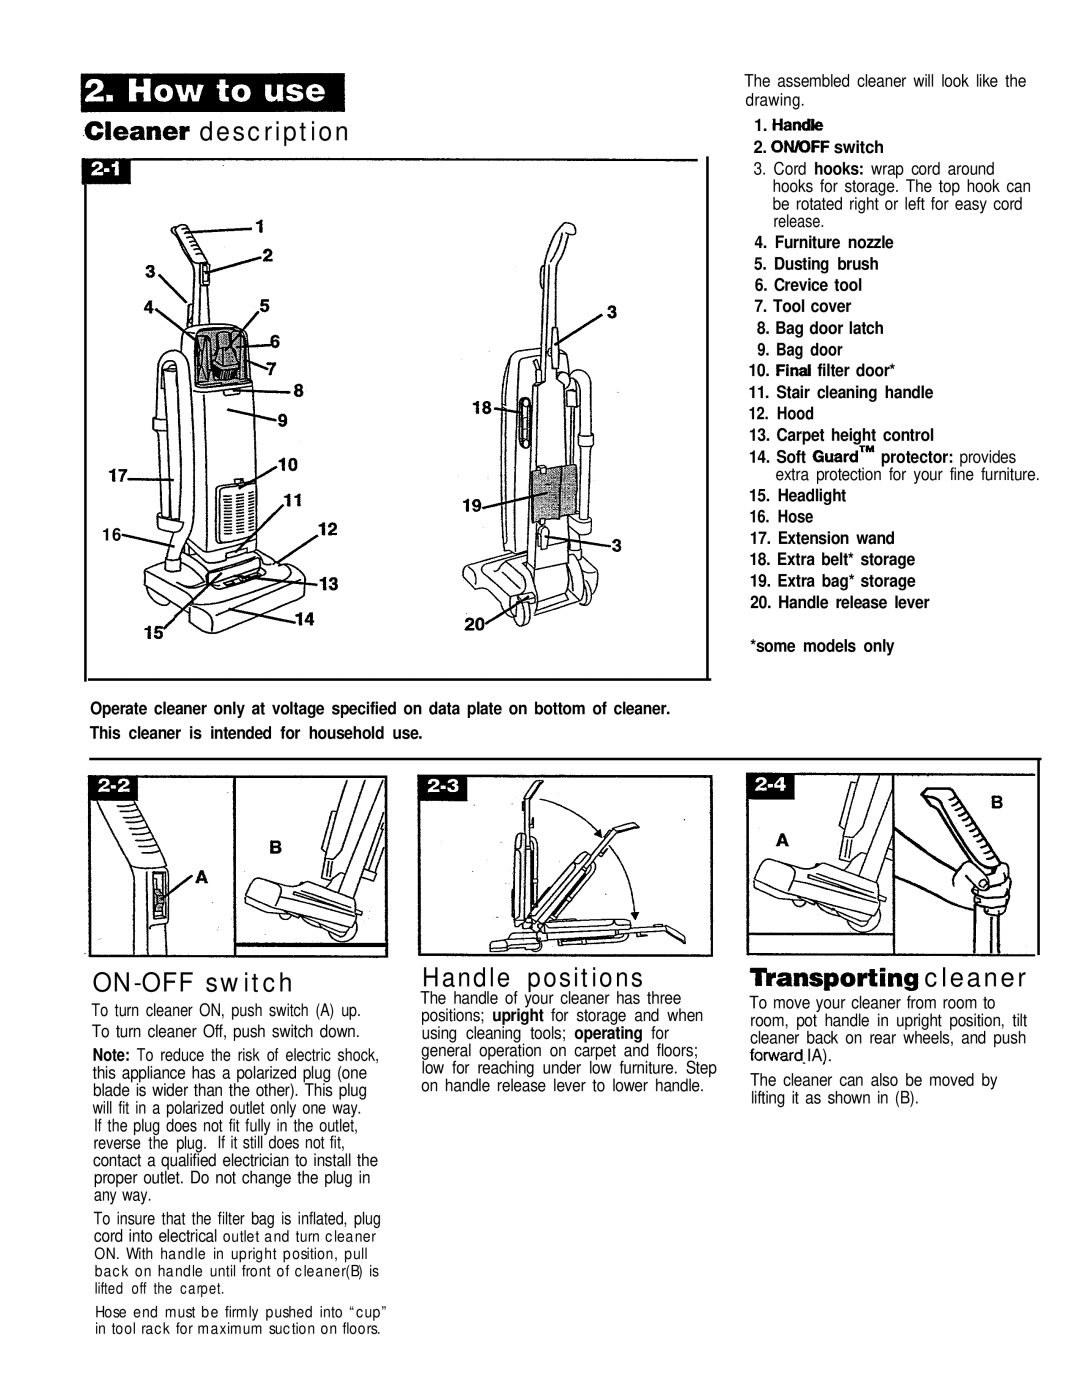 Hoover 53425 owner manual Cleaner description, ON-OFF switch, Handle positions, TLansporting cleaner, Handte Onidff switch 